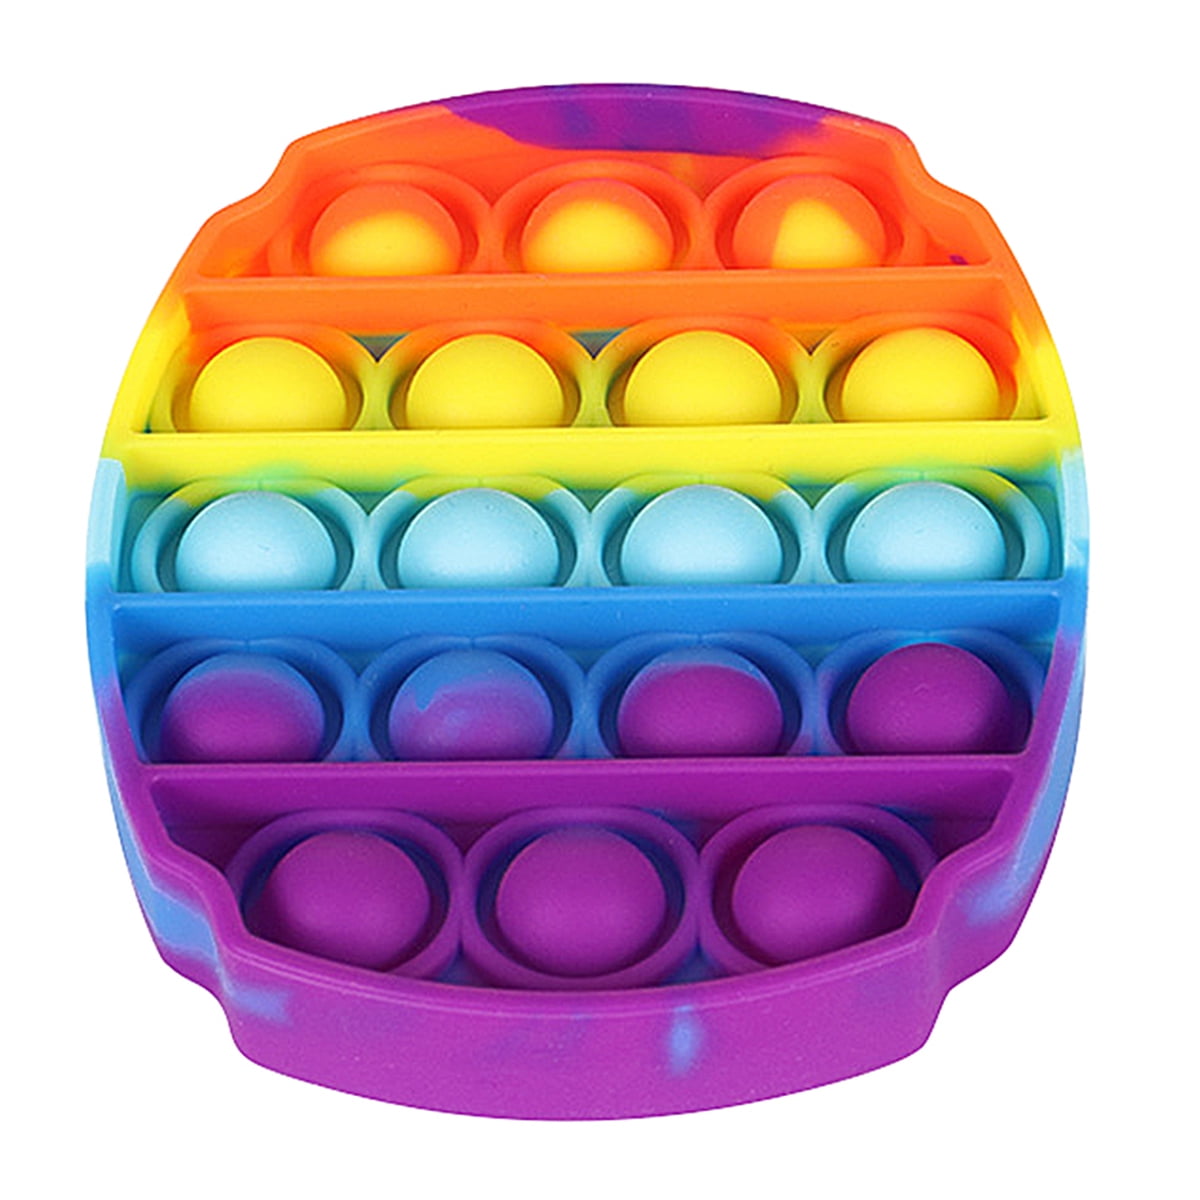 Details about   Push Simple AMONG US Squishy Fun ADHD Pack Poppets Dimple Gift Kid its Rainbow 